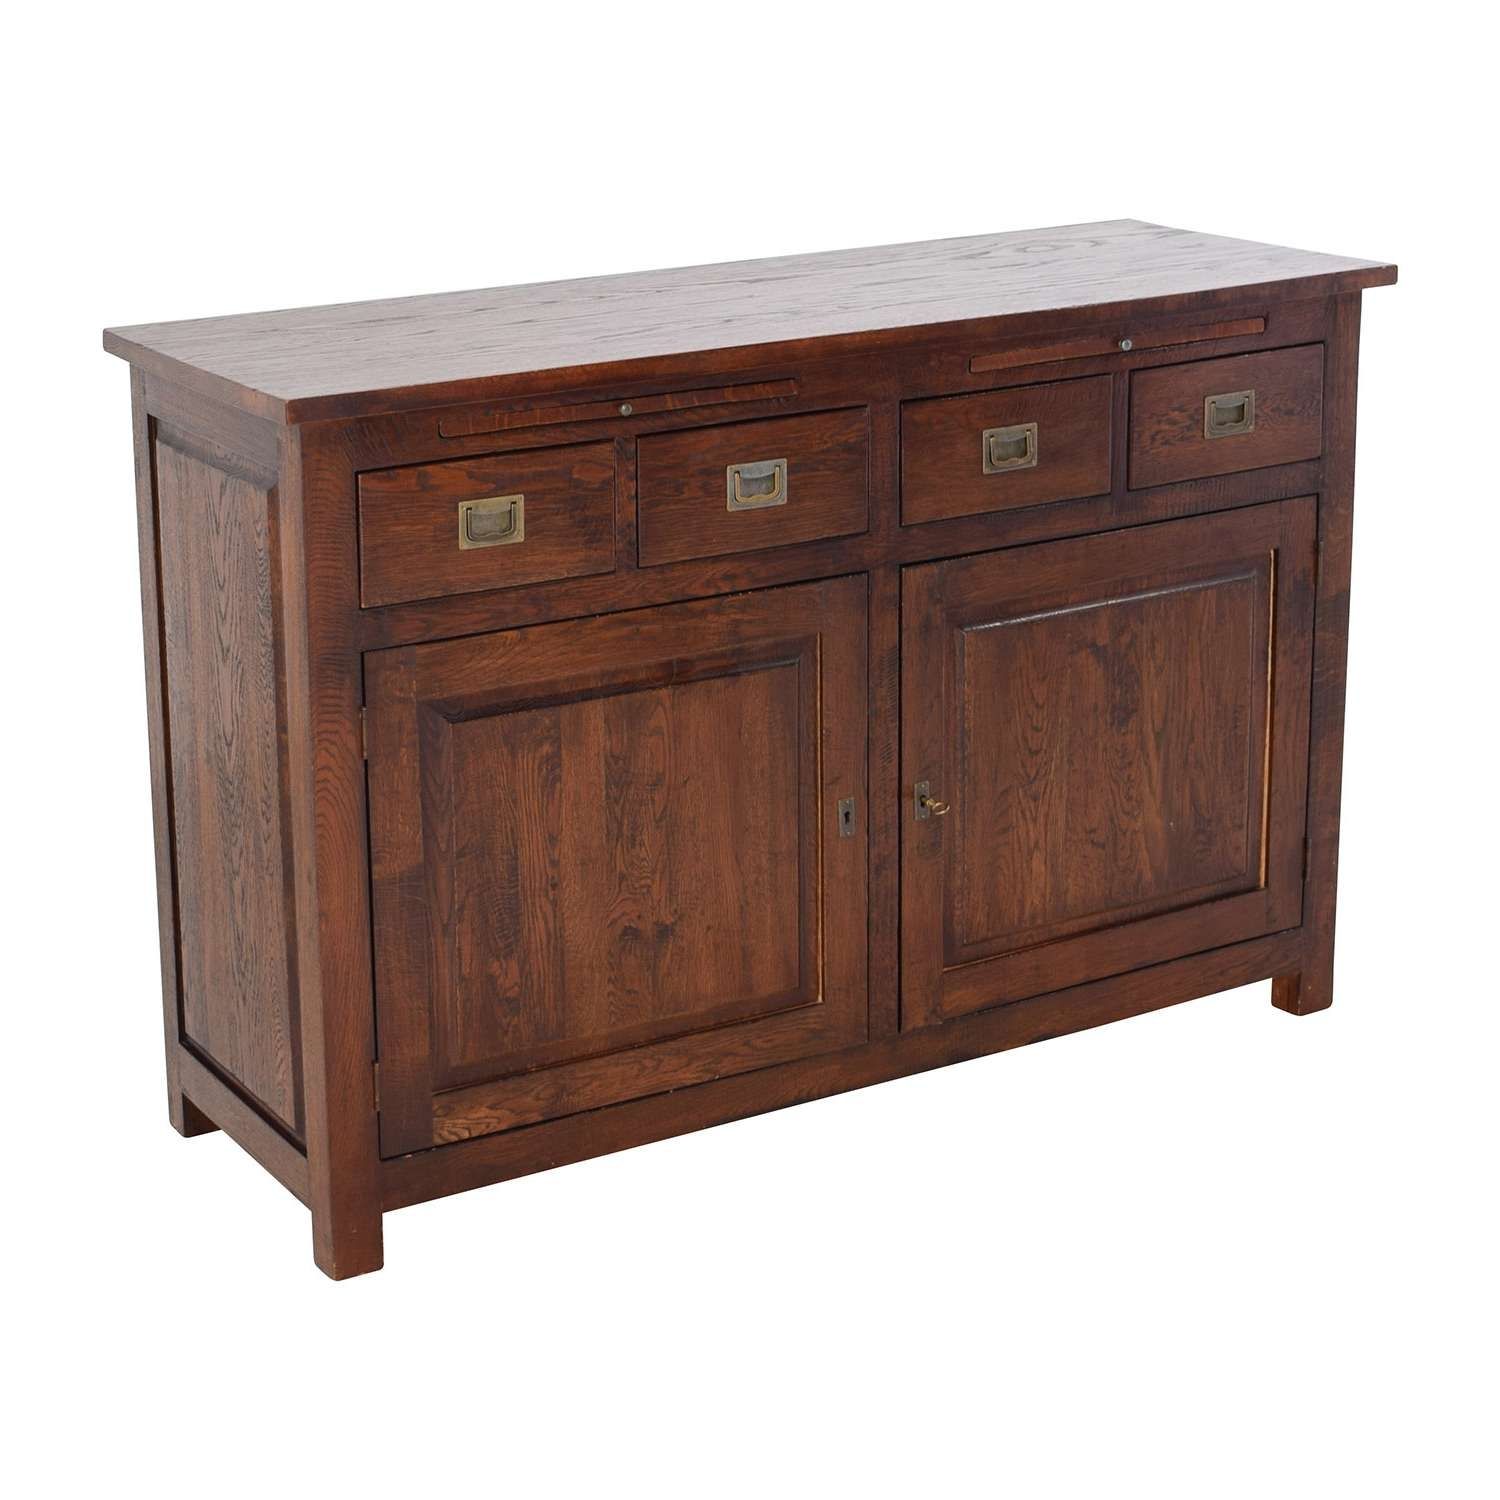 67% Off – Crate And Barrel Crate & Barrel Bordeaux Buffet Within Crate And Barrel Sideboards (View 6 of 20)